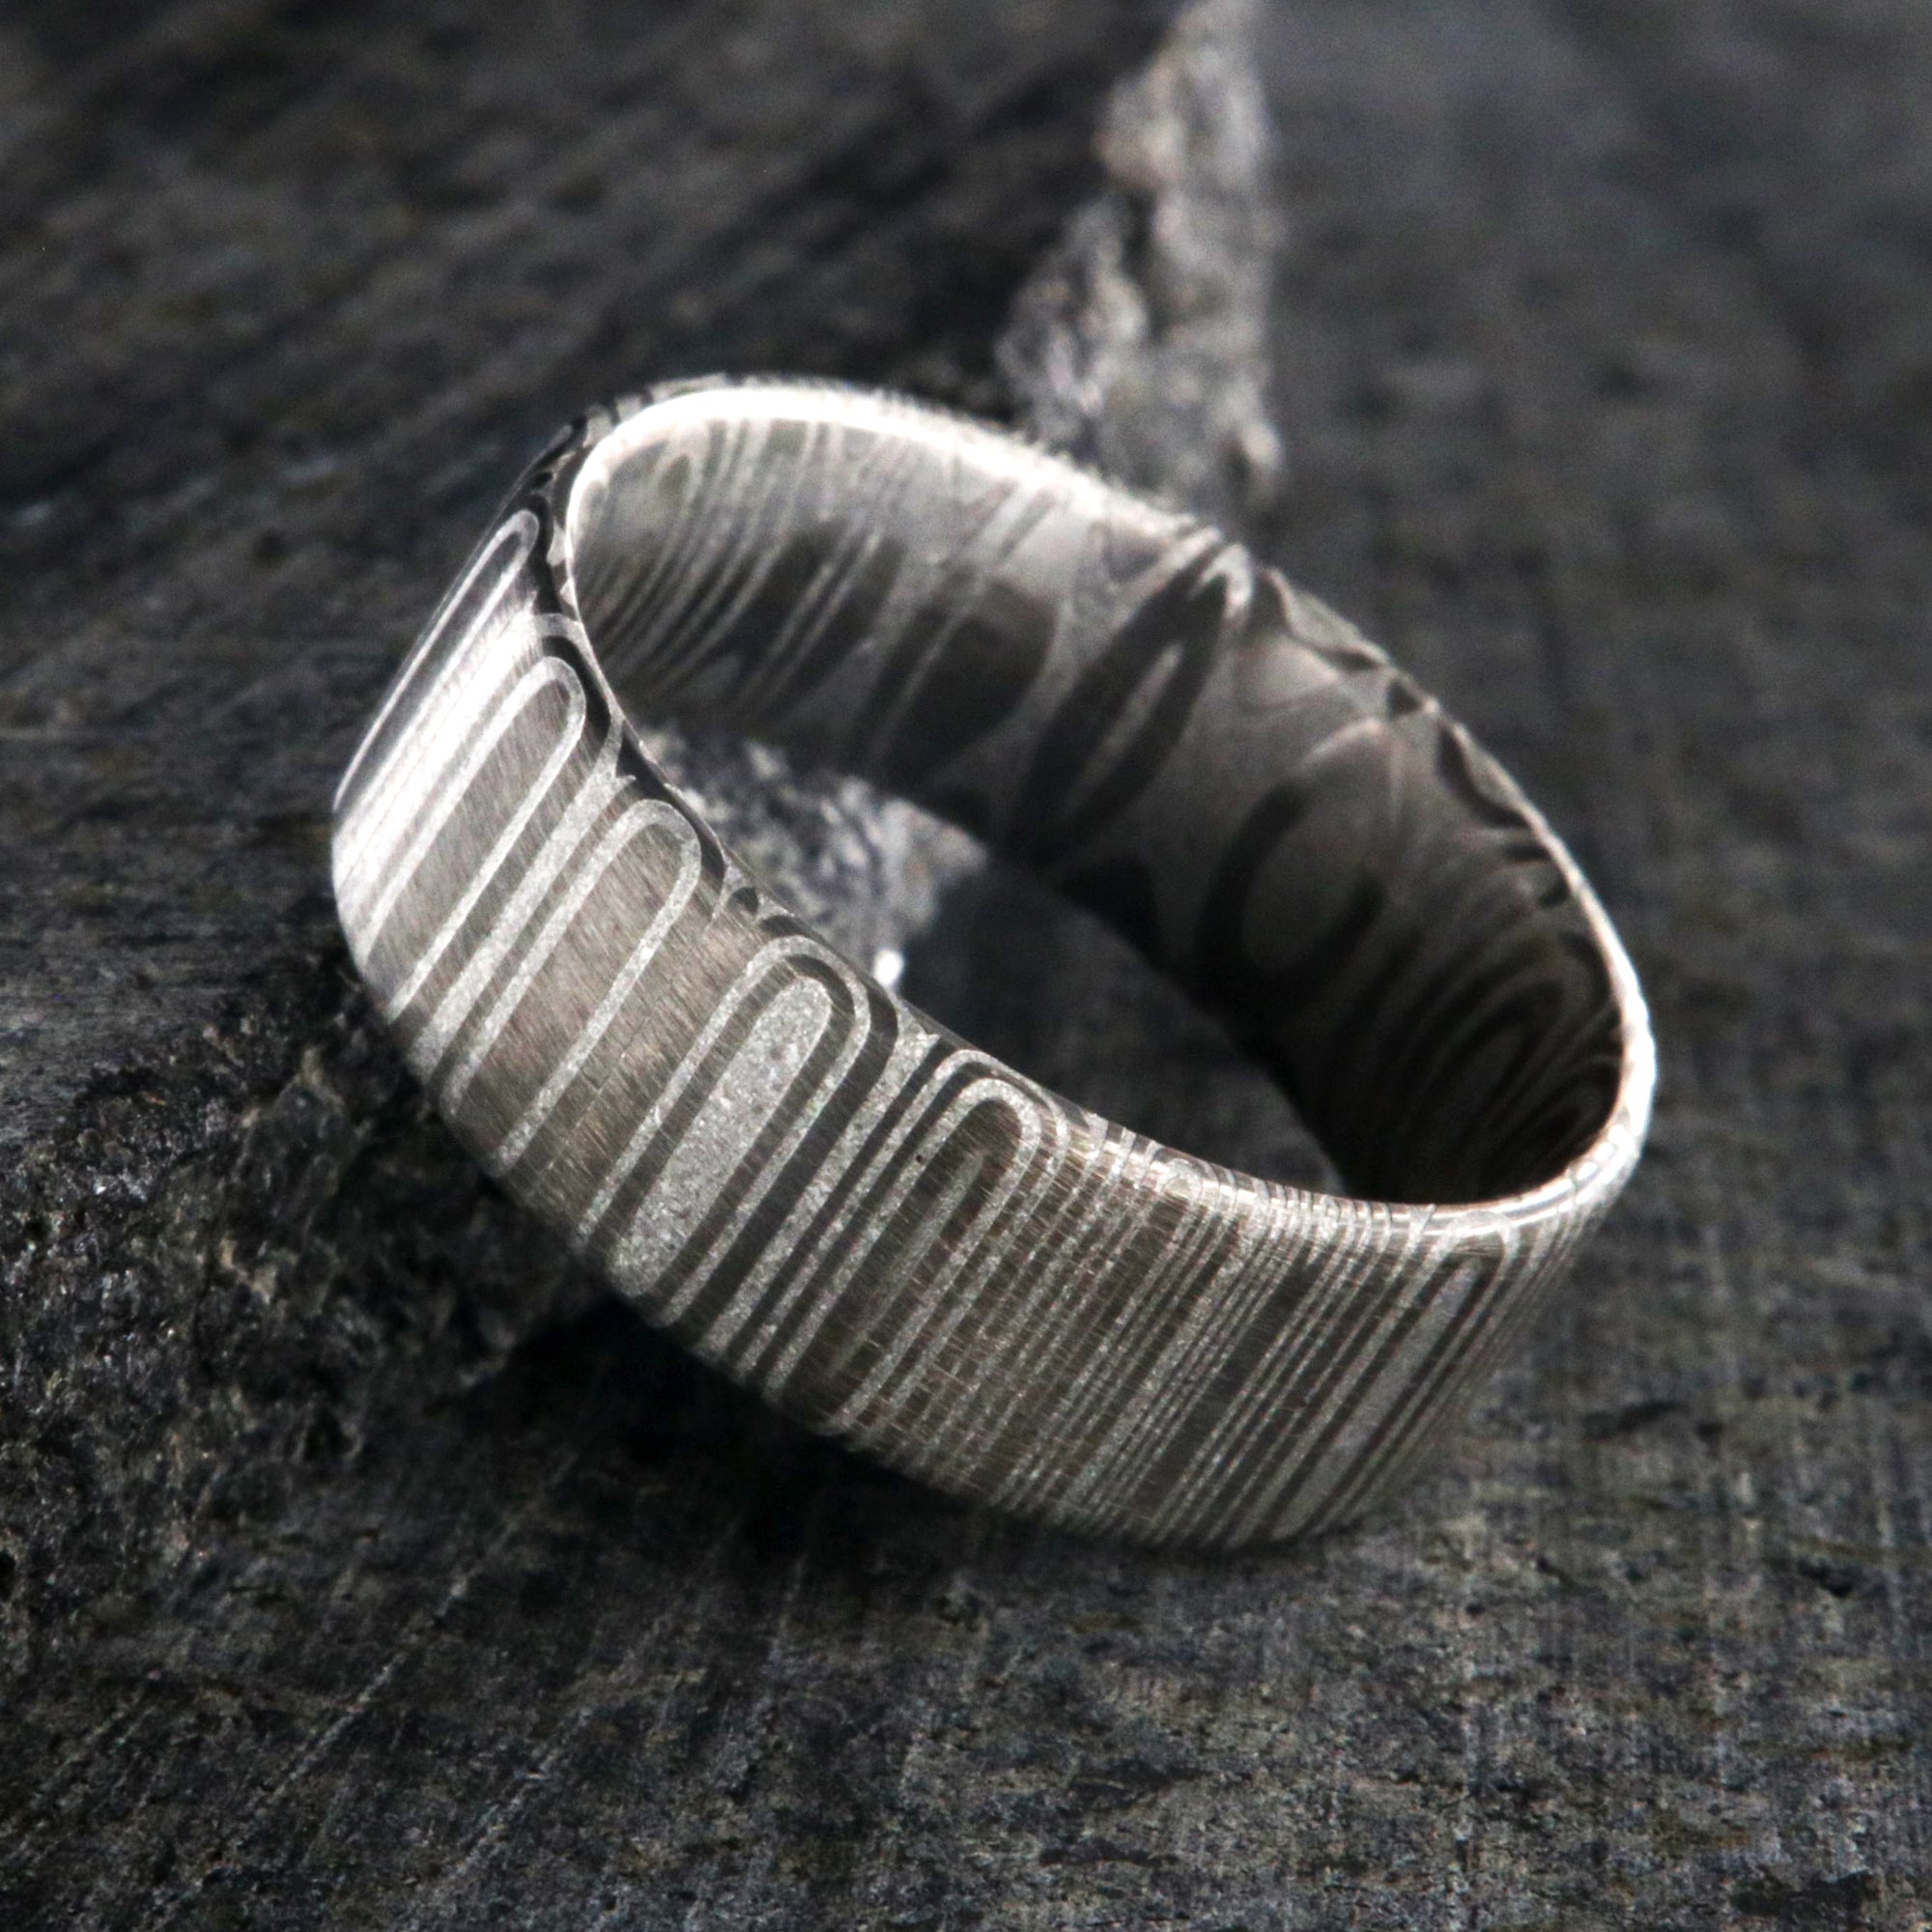 8mm wide Damascus steel wedding band with flat profile